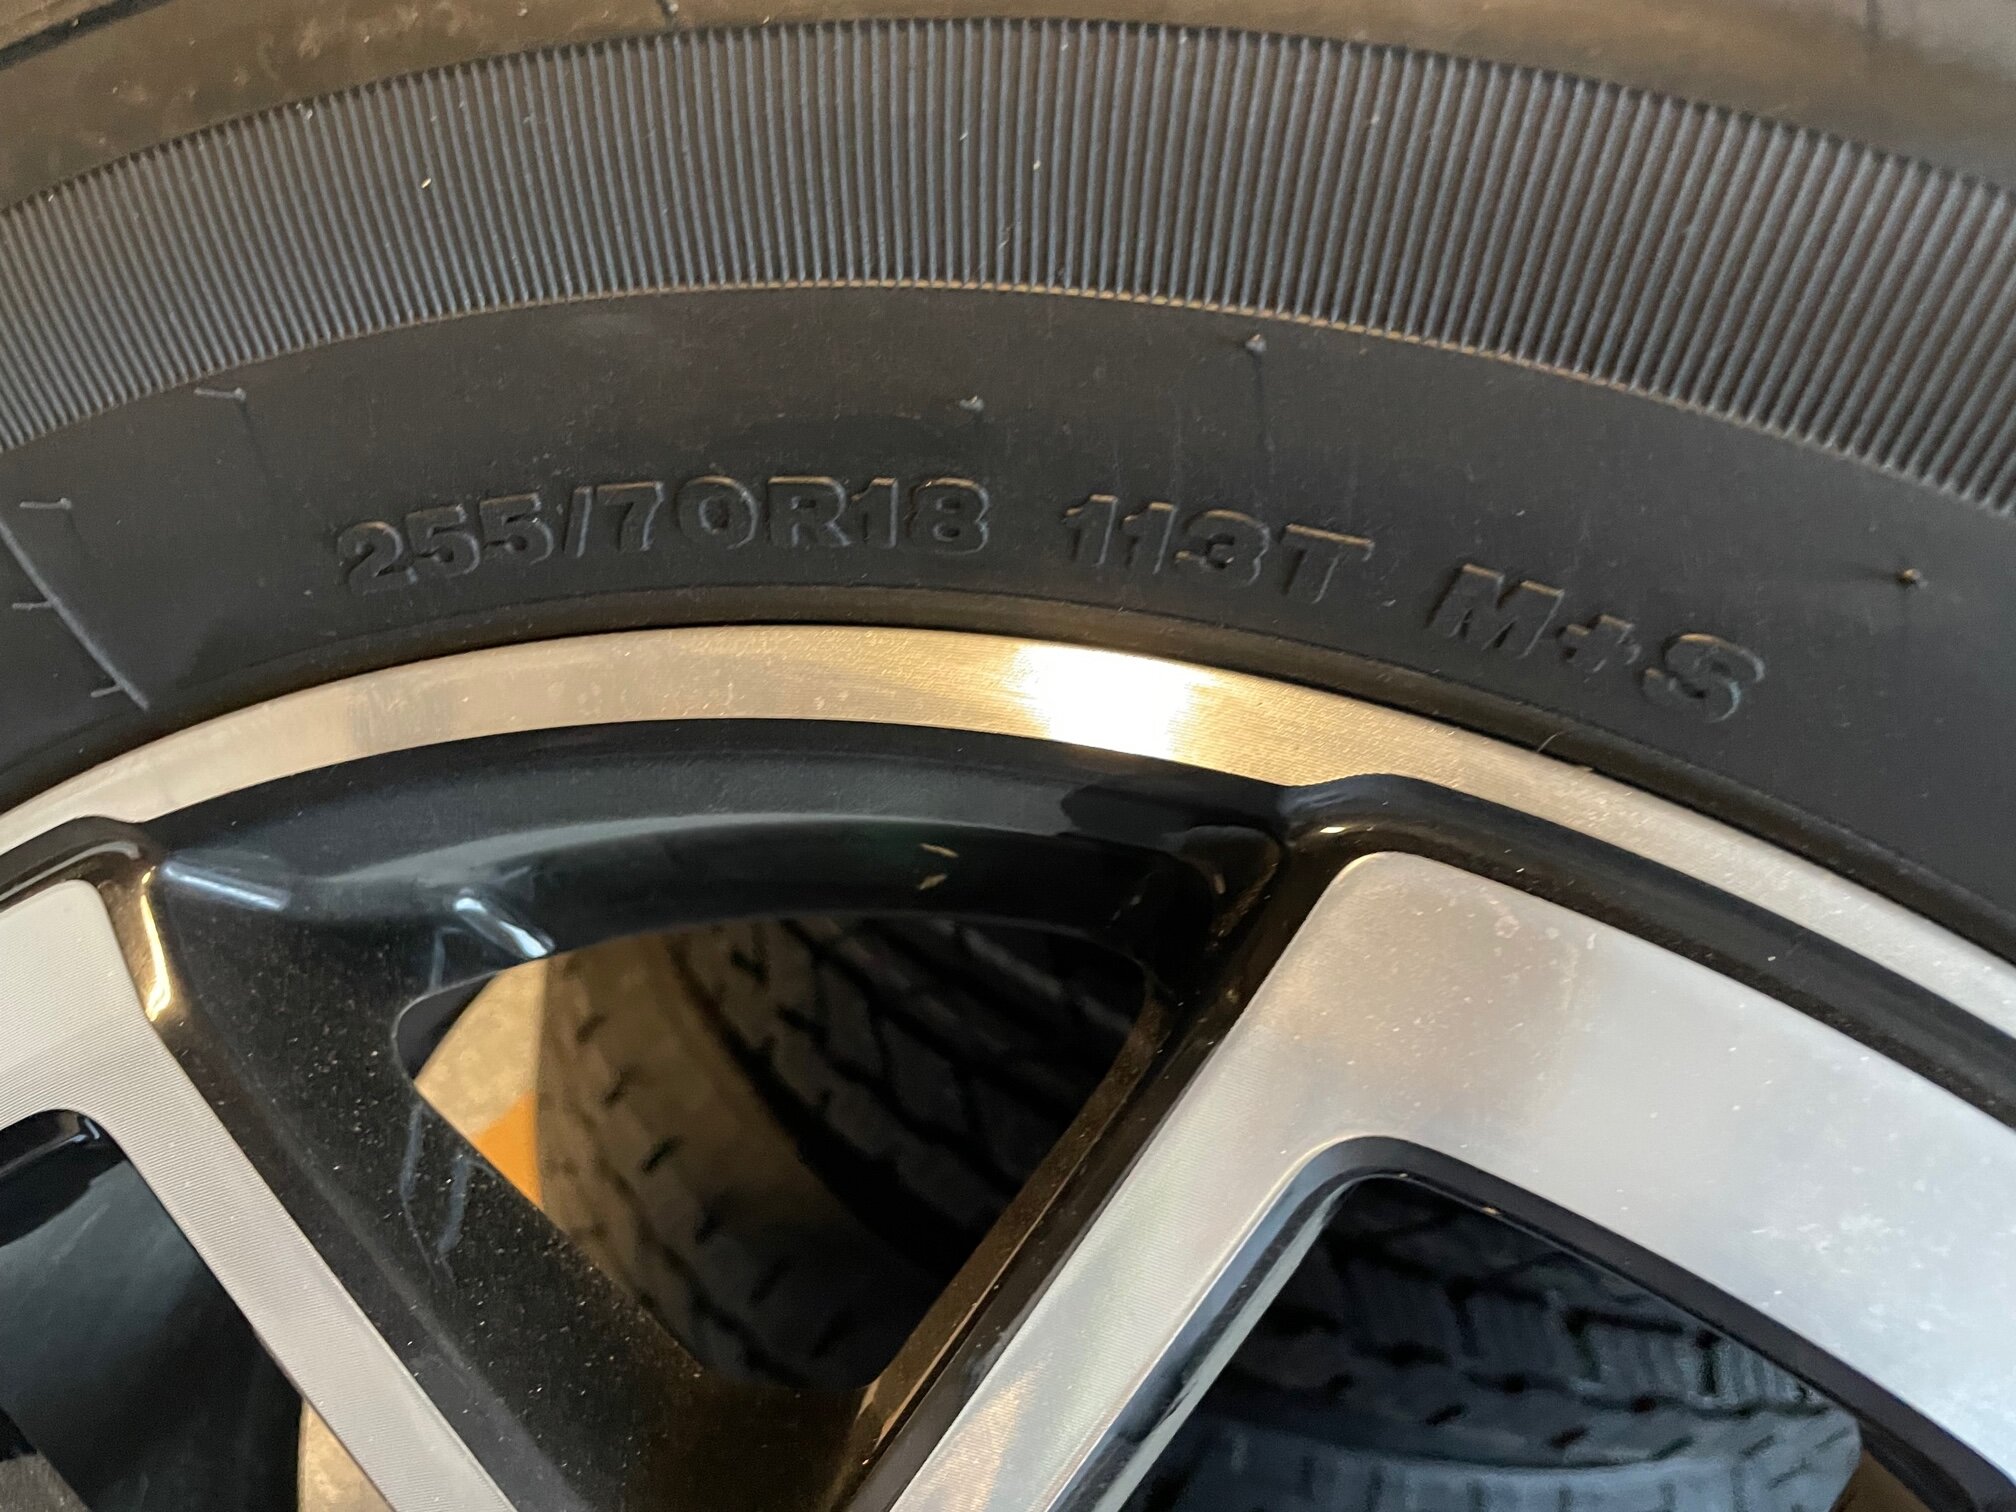 synchrony-bank-discount-tire-outlet-save-65-jlcatj-gob-mx